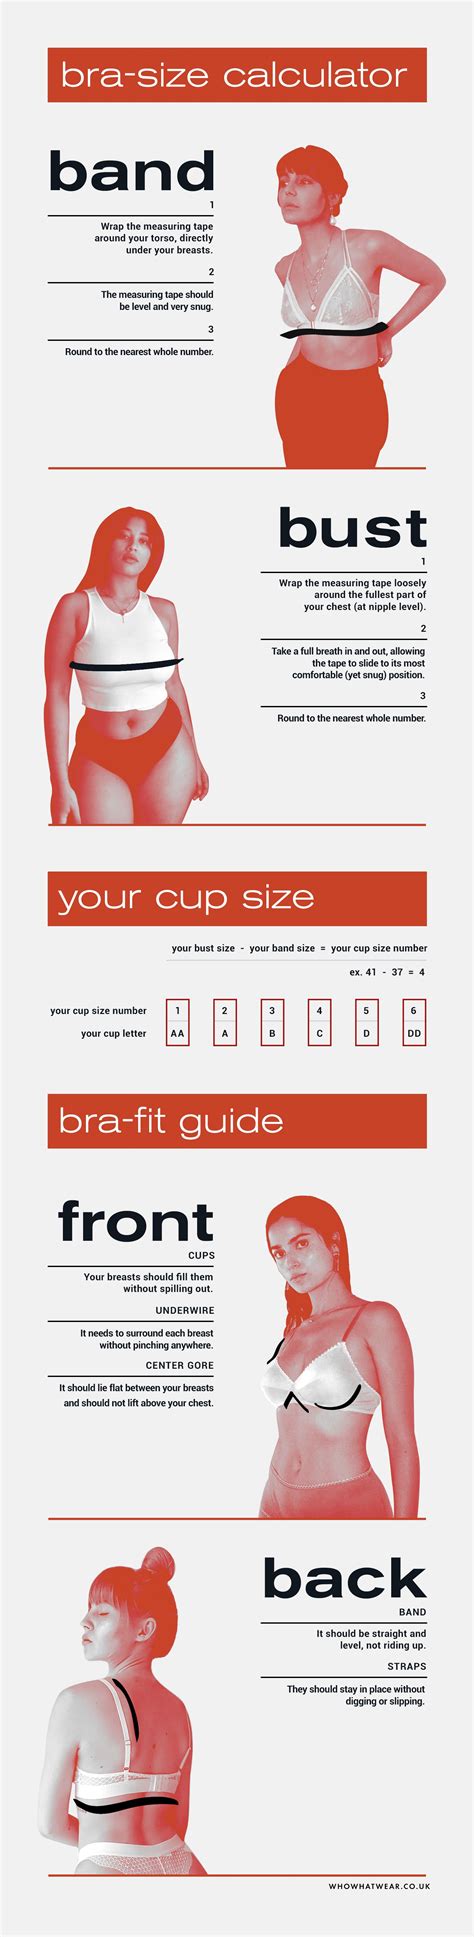 This Bra Size Calculator Is A Thing Of Genius Bra Size Calculator